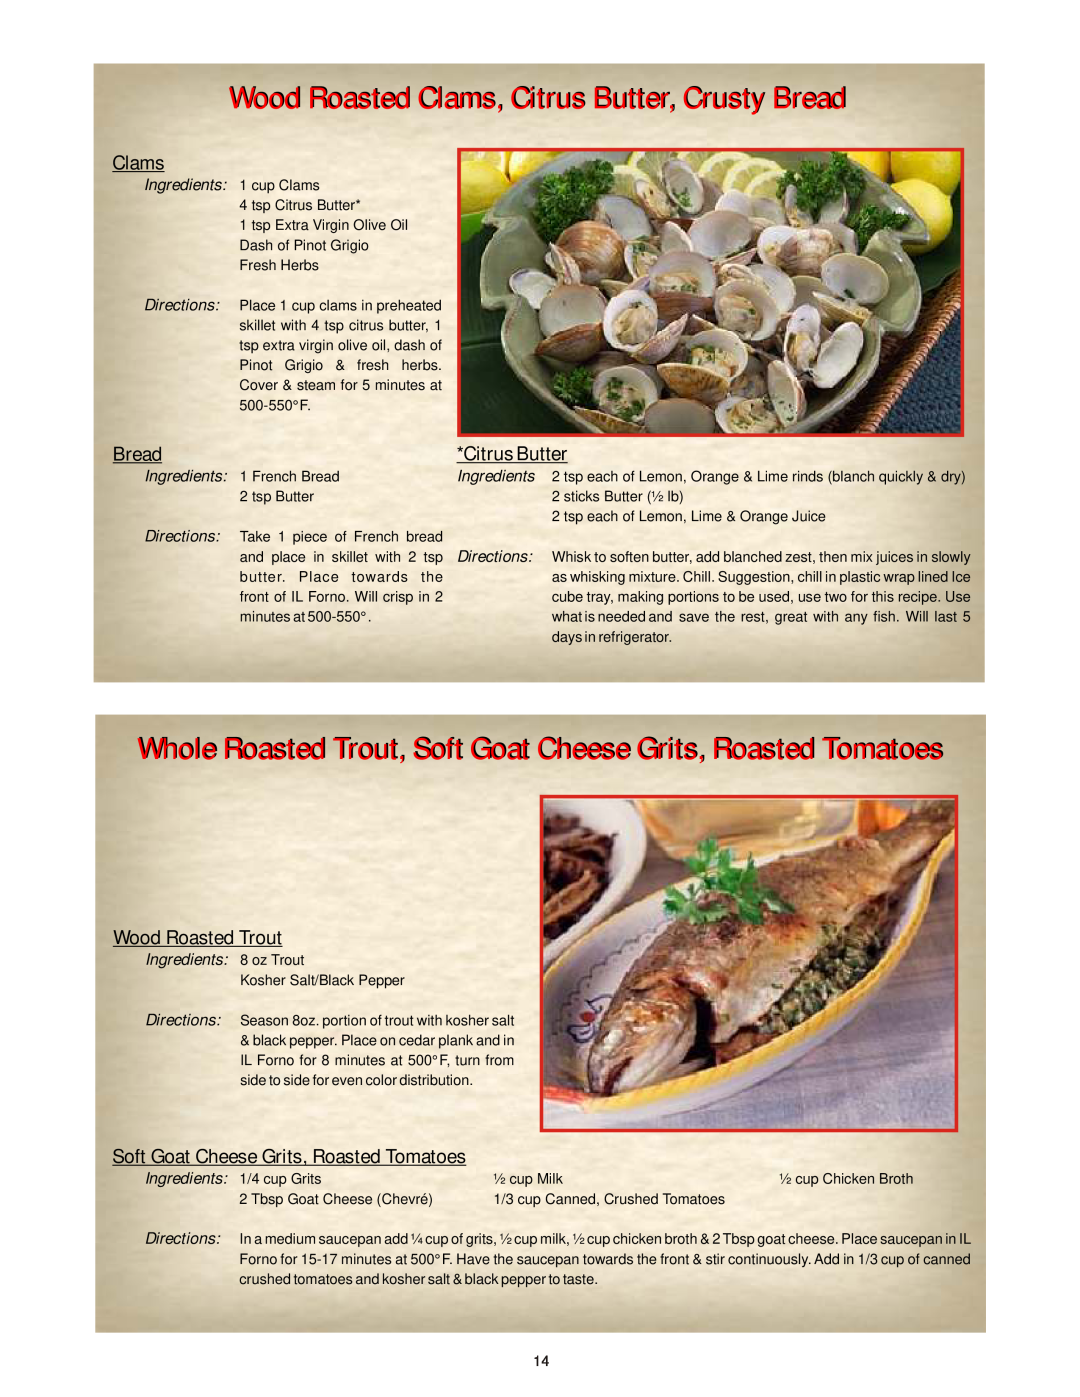 Bakers Pride Oven Classic Oven Clams, Bread, Citrus Butter, Wood Roasted Trout, Soft Goat Cheese Grits, Roasted Tomatoes 